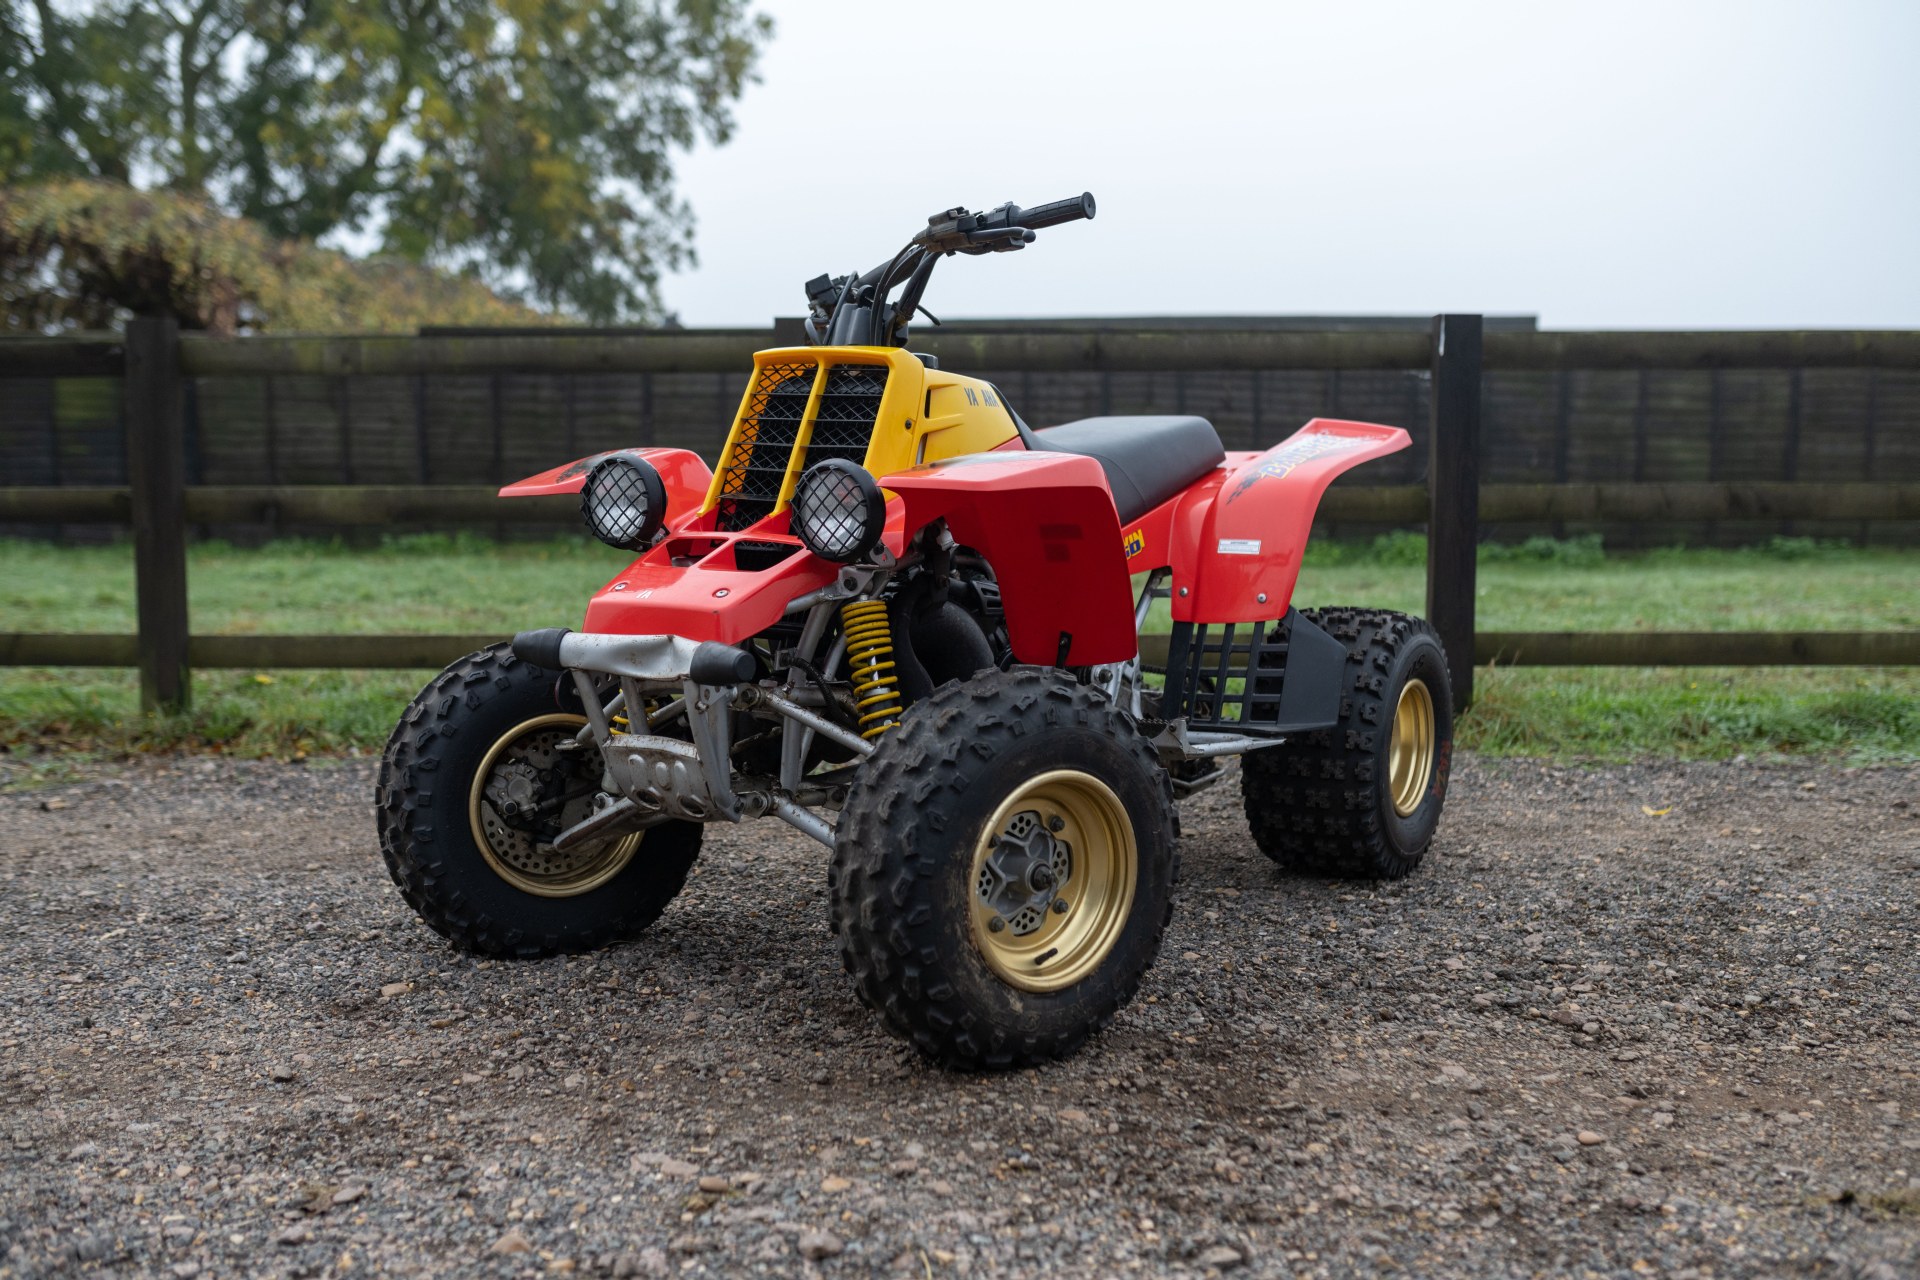 Yamaha Banshee ATV That Nearly Killed Ozzy Osbourne Is for Sale at